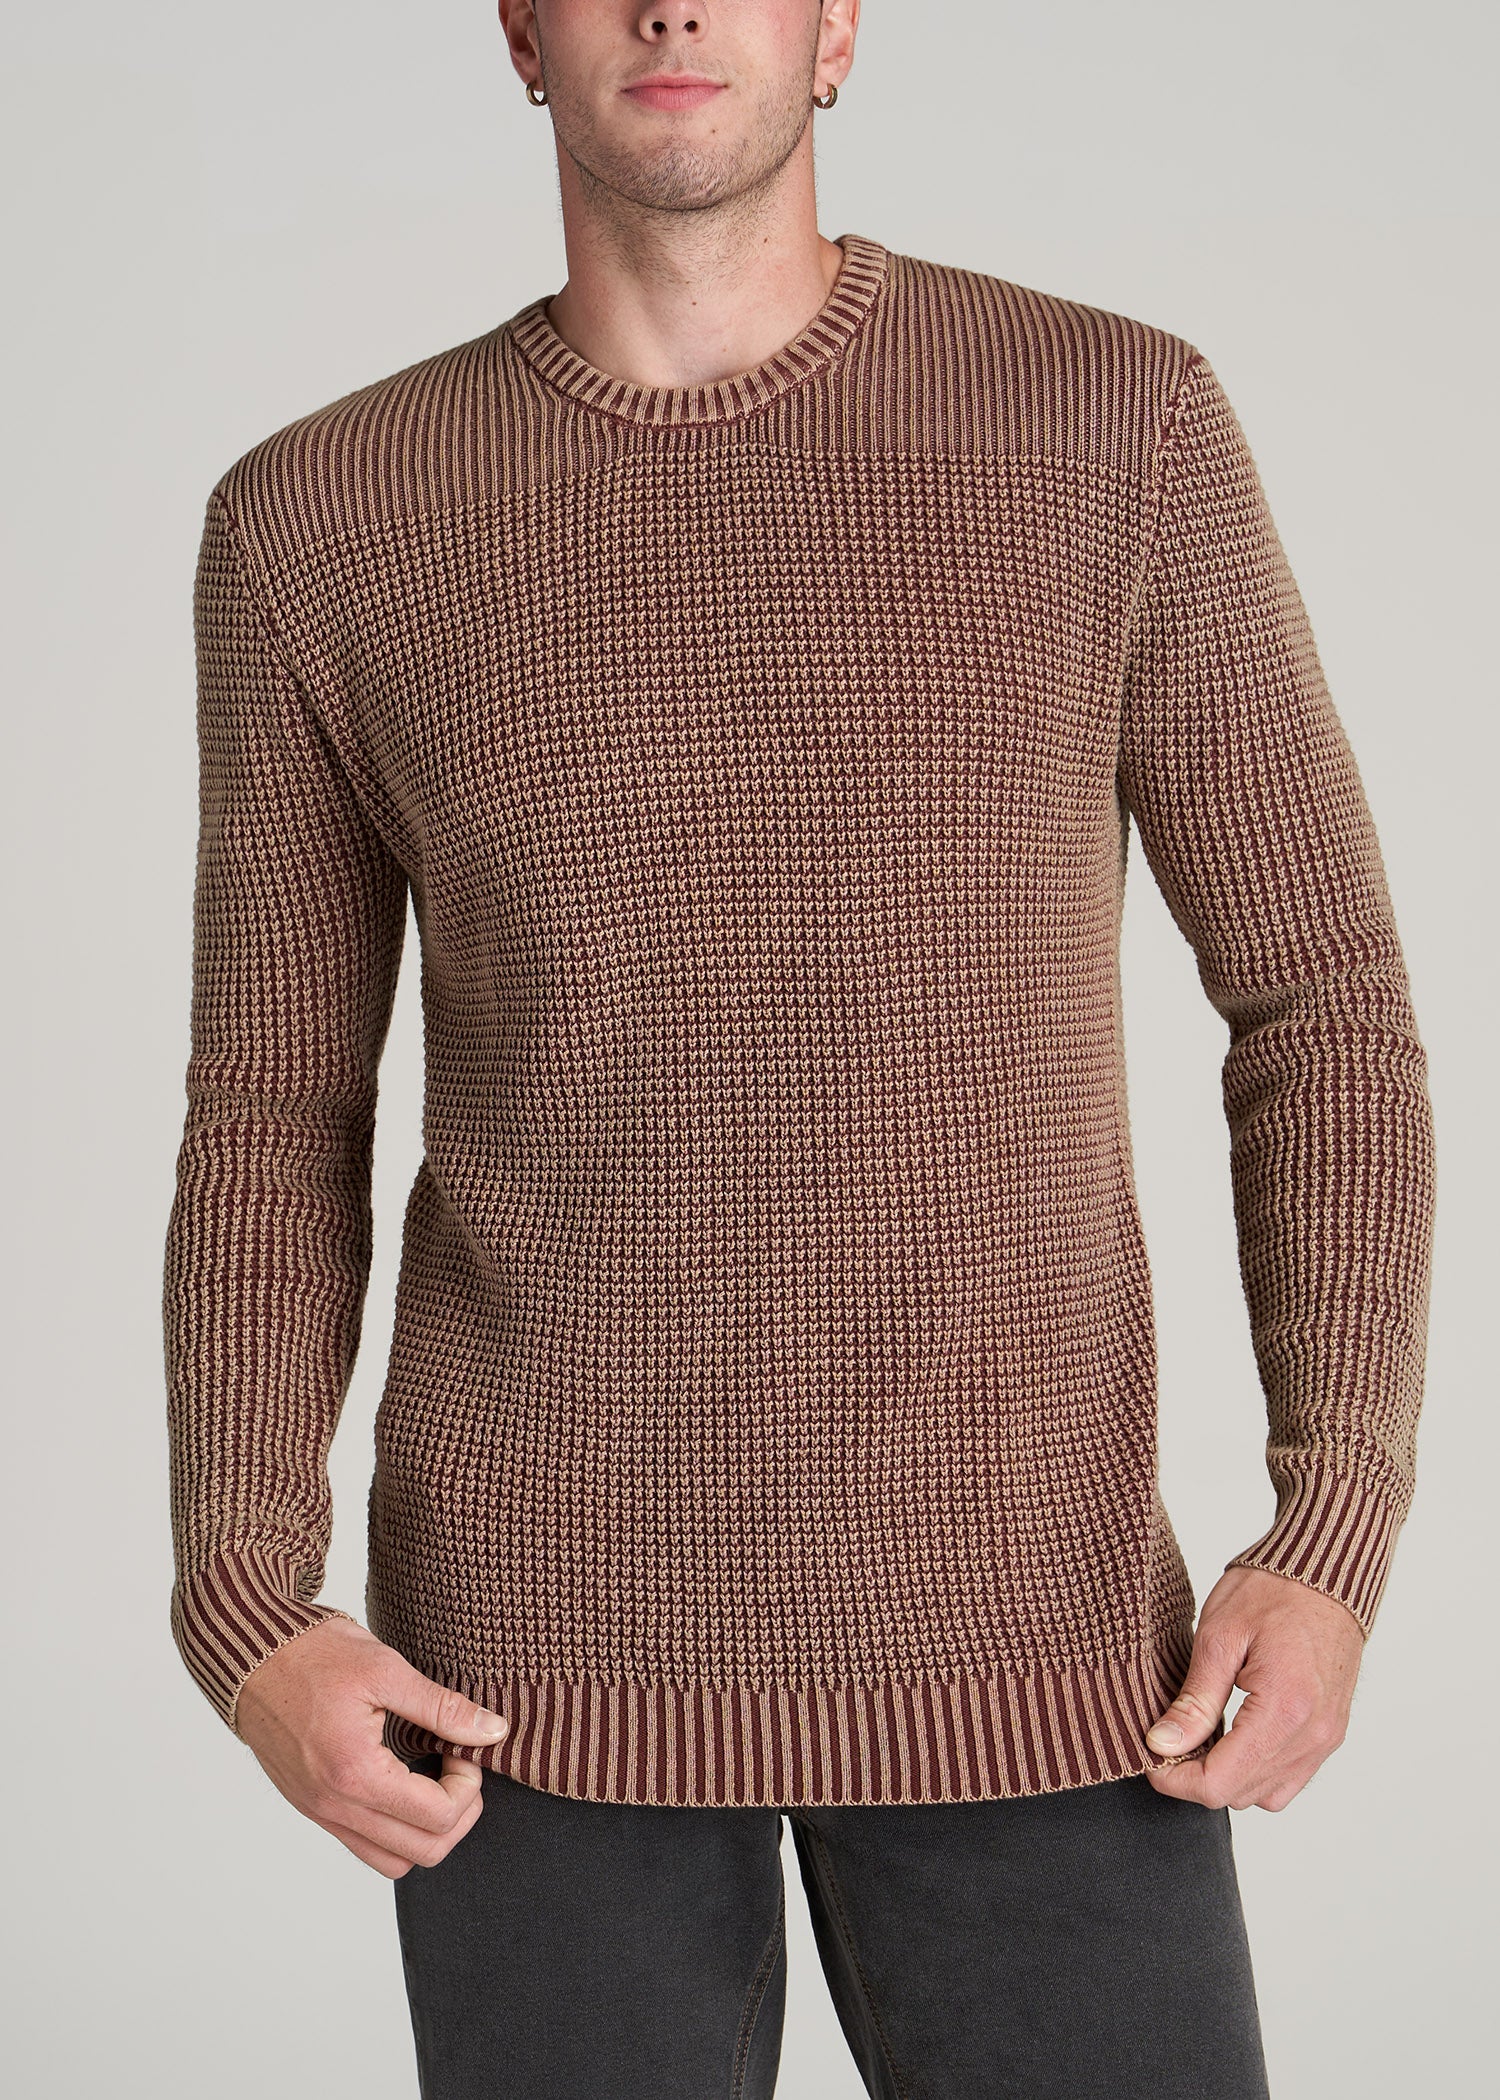       American-Tall-Men-Acid-Wash-Sweater-Copper-front